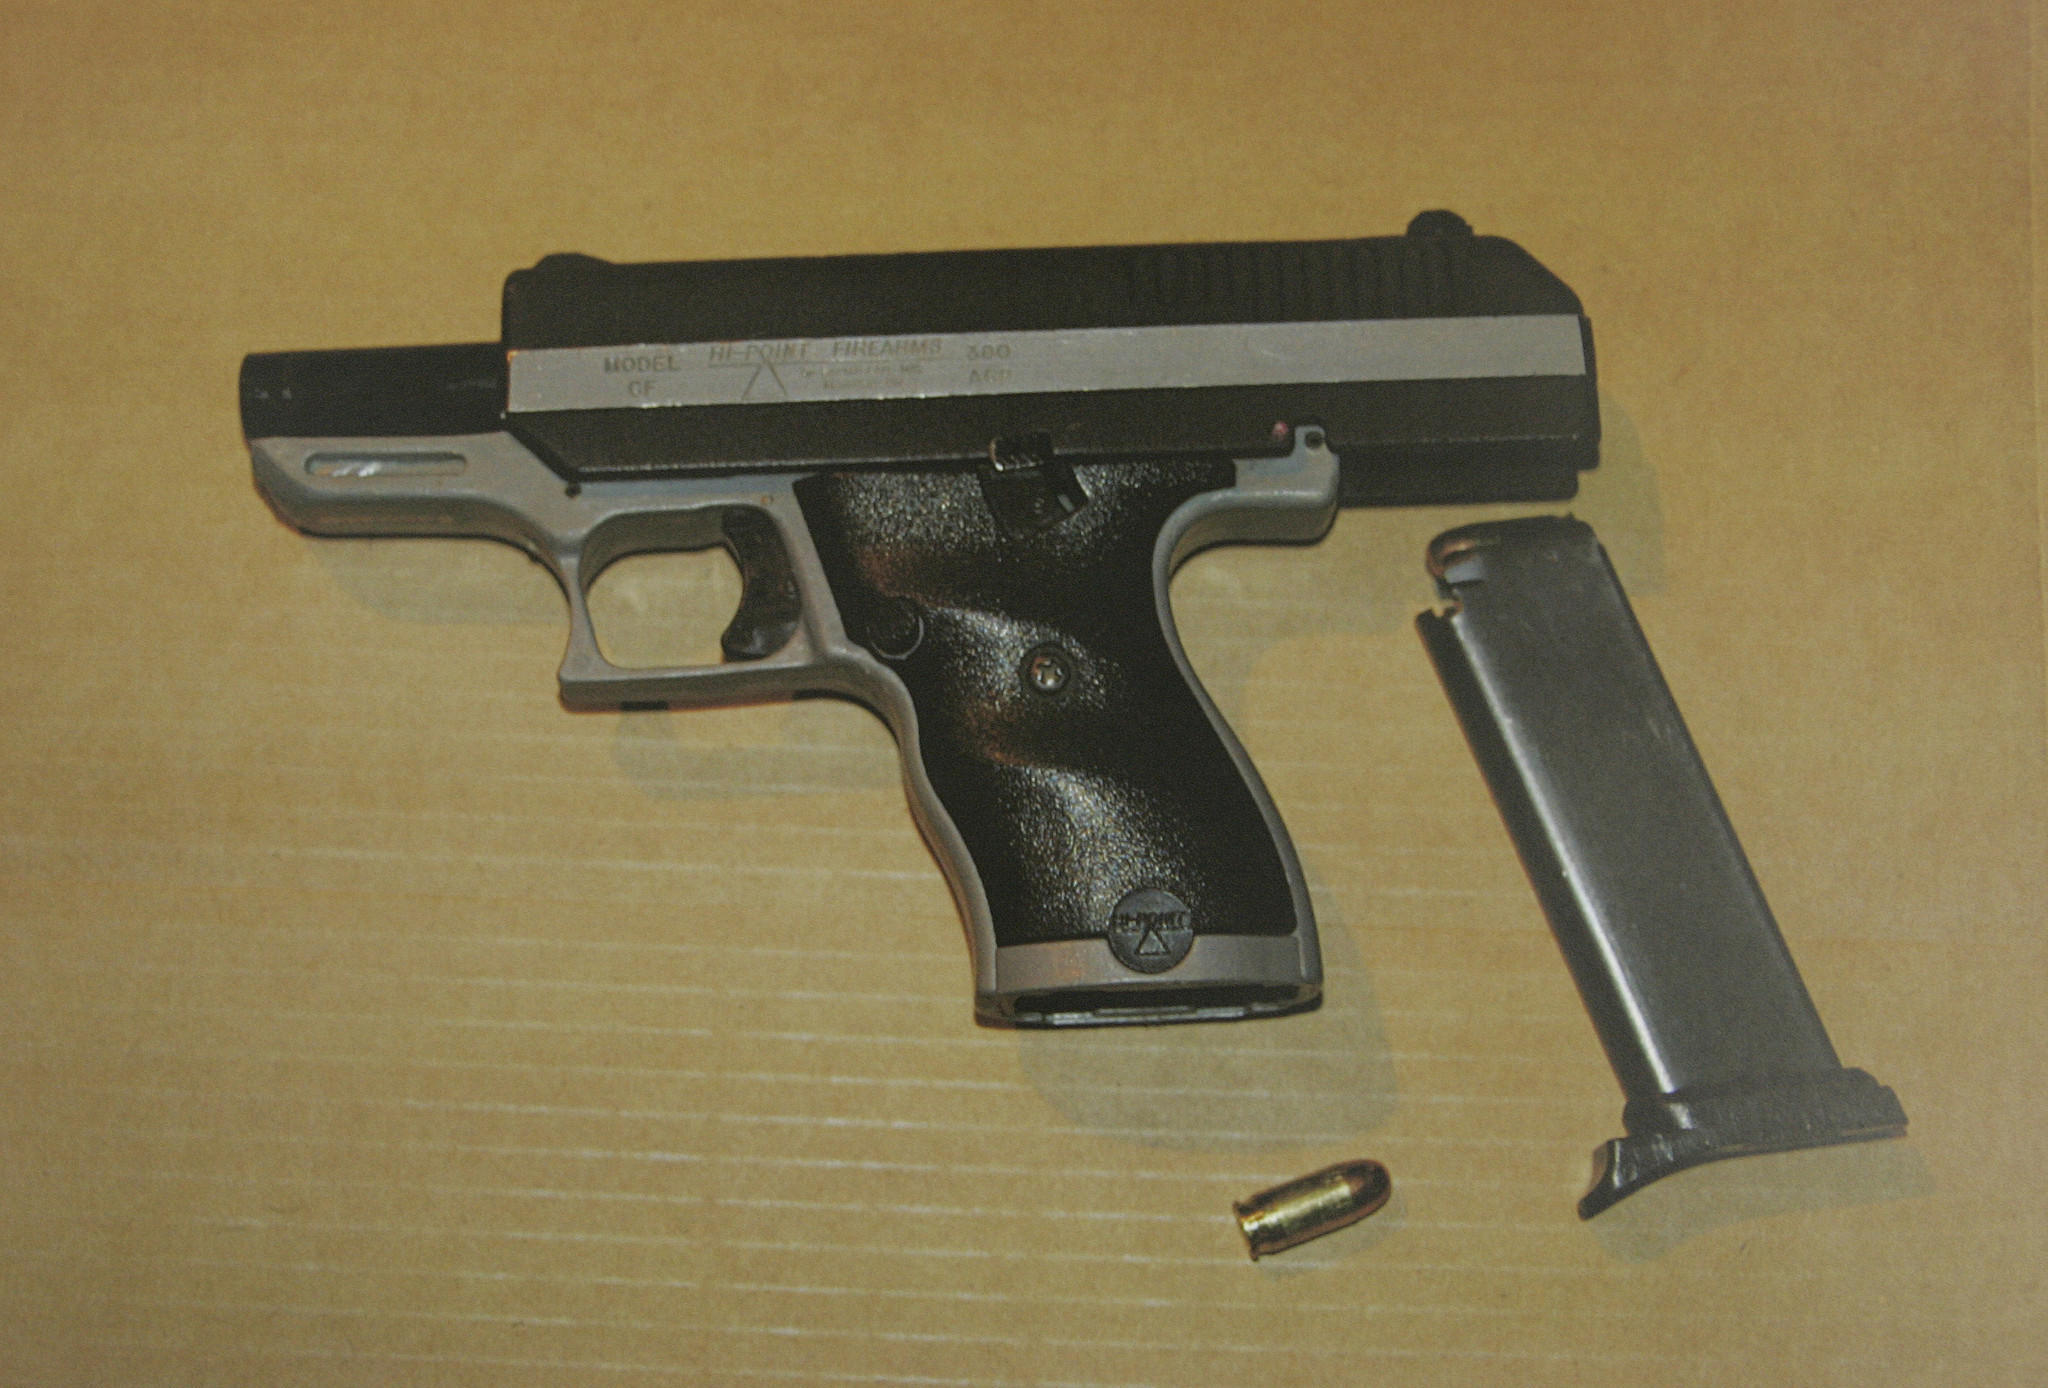 Aurora police confiscate three loaded guns during traffic stop - Aurora ...